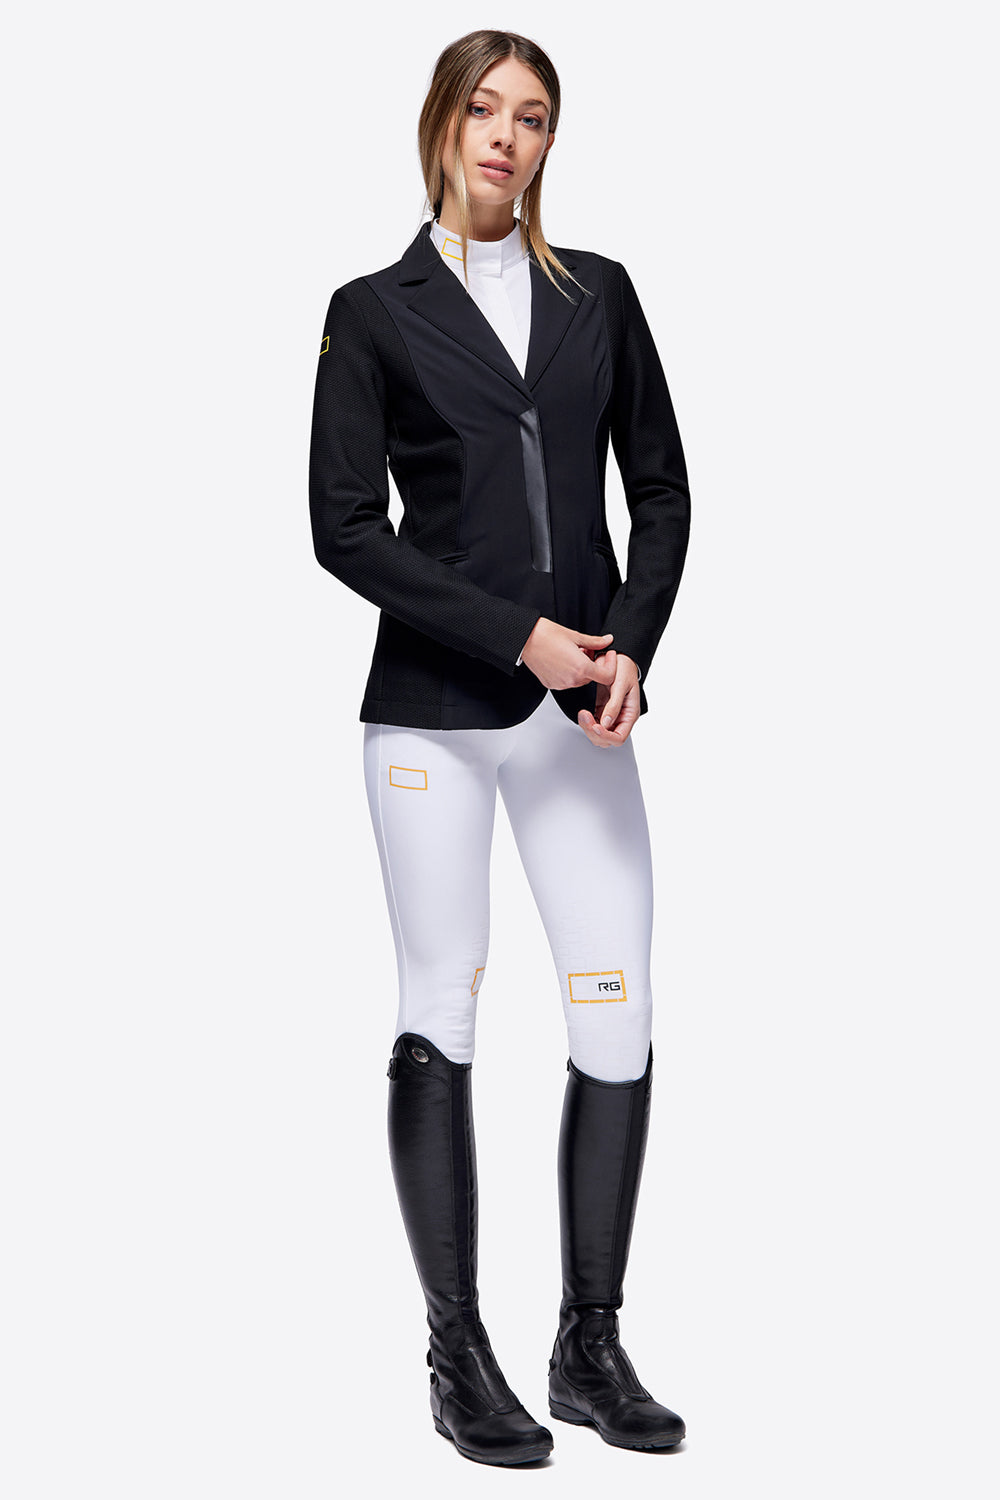 RG Womens Jersey And Mesh Zip Riding Jacket